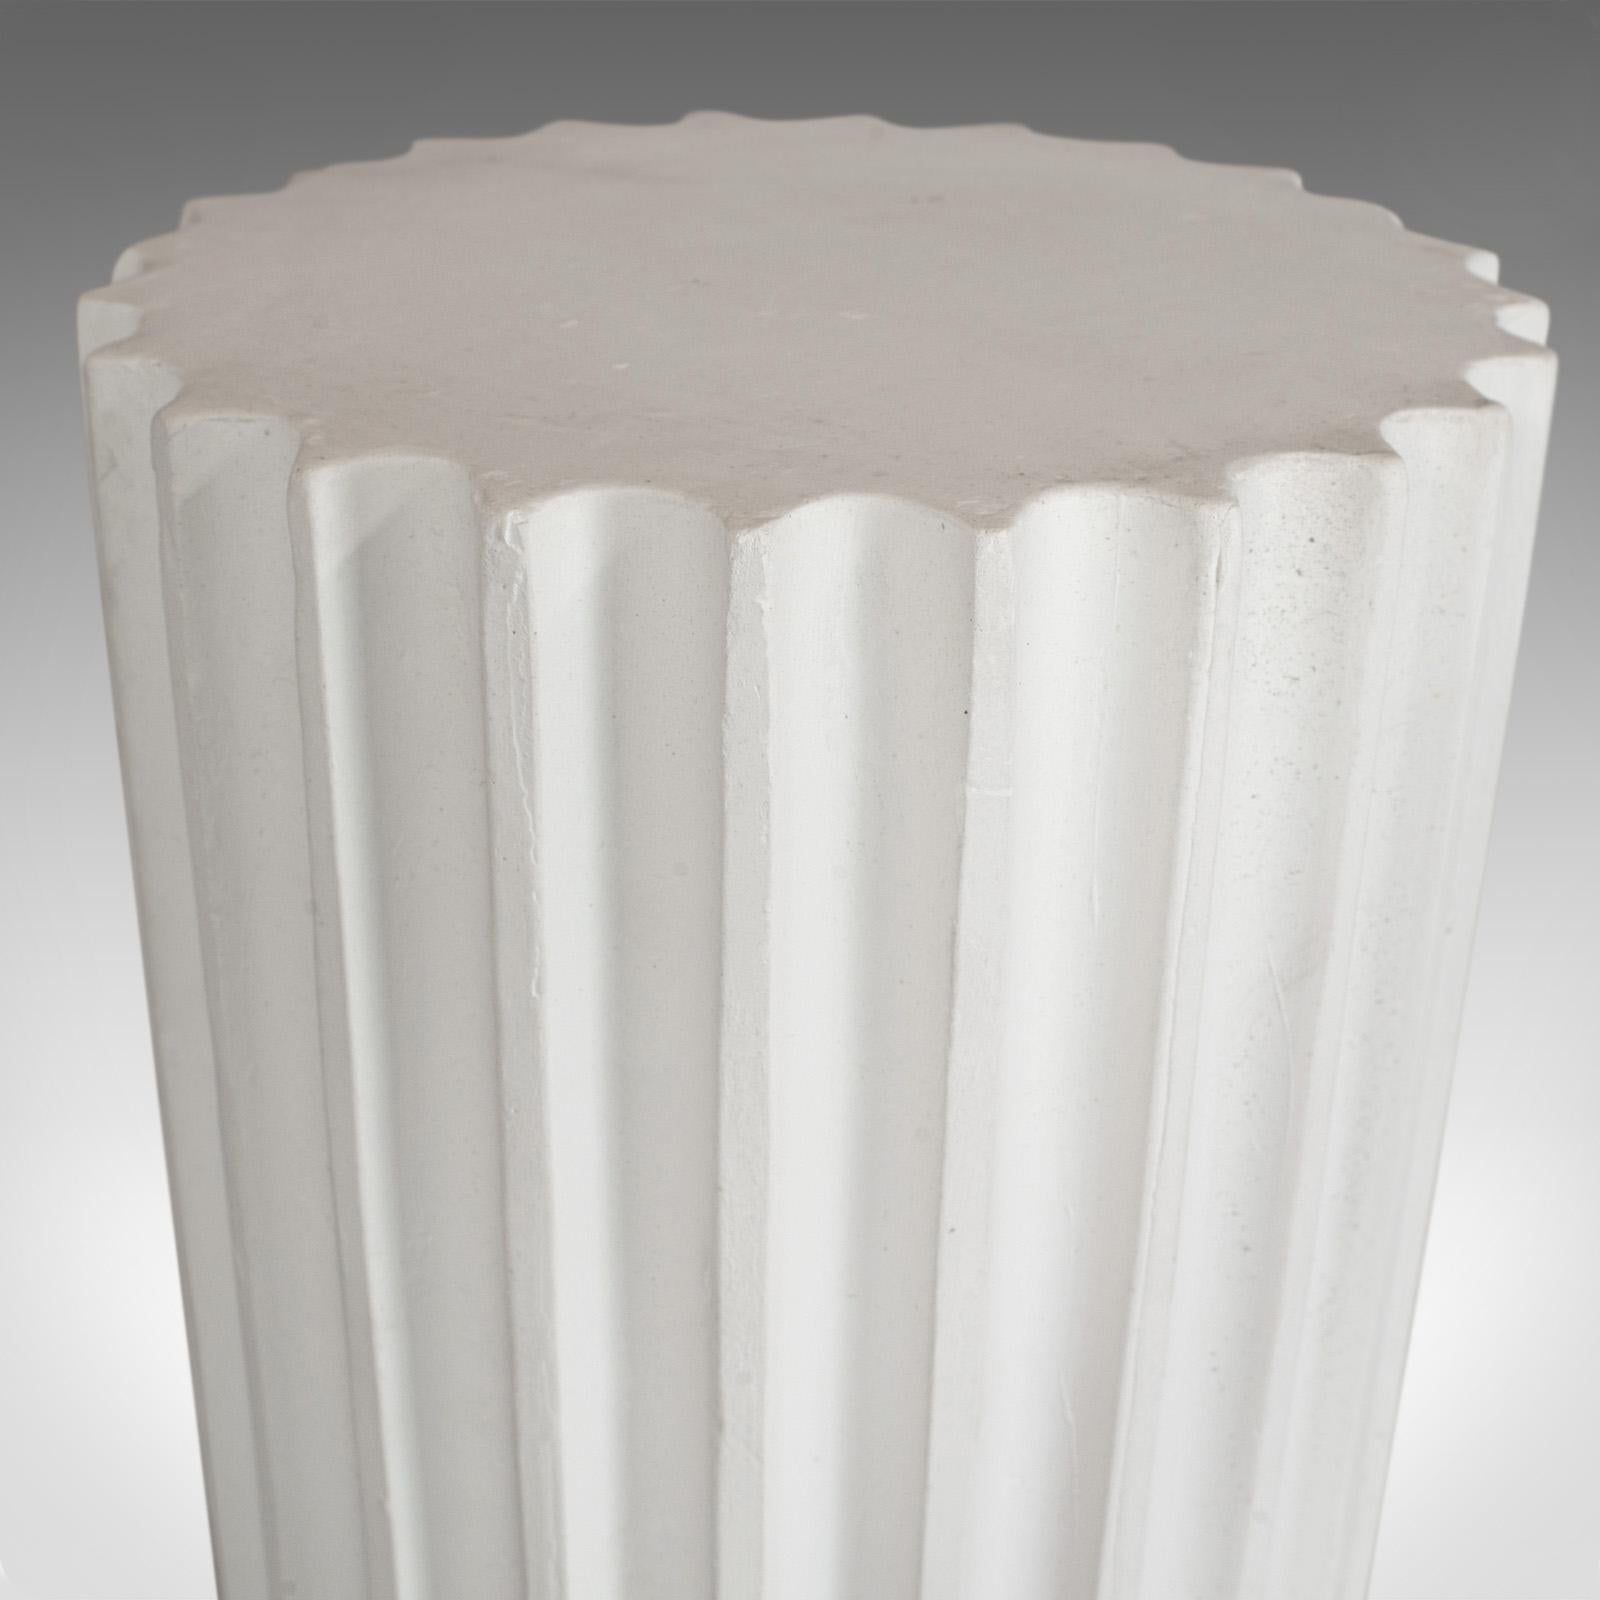 English Vintage Column Base, Architectural, Doric, Classic, C20th - Multiple Available